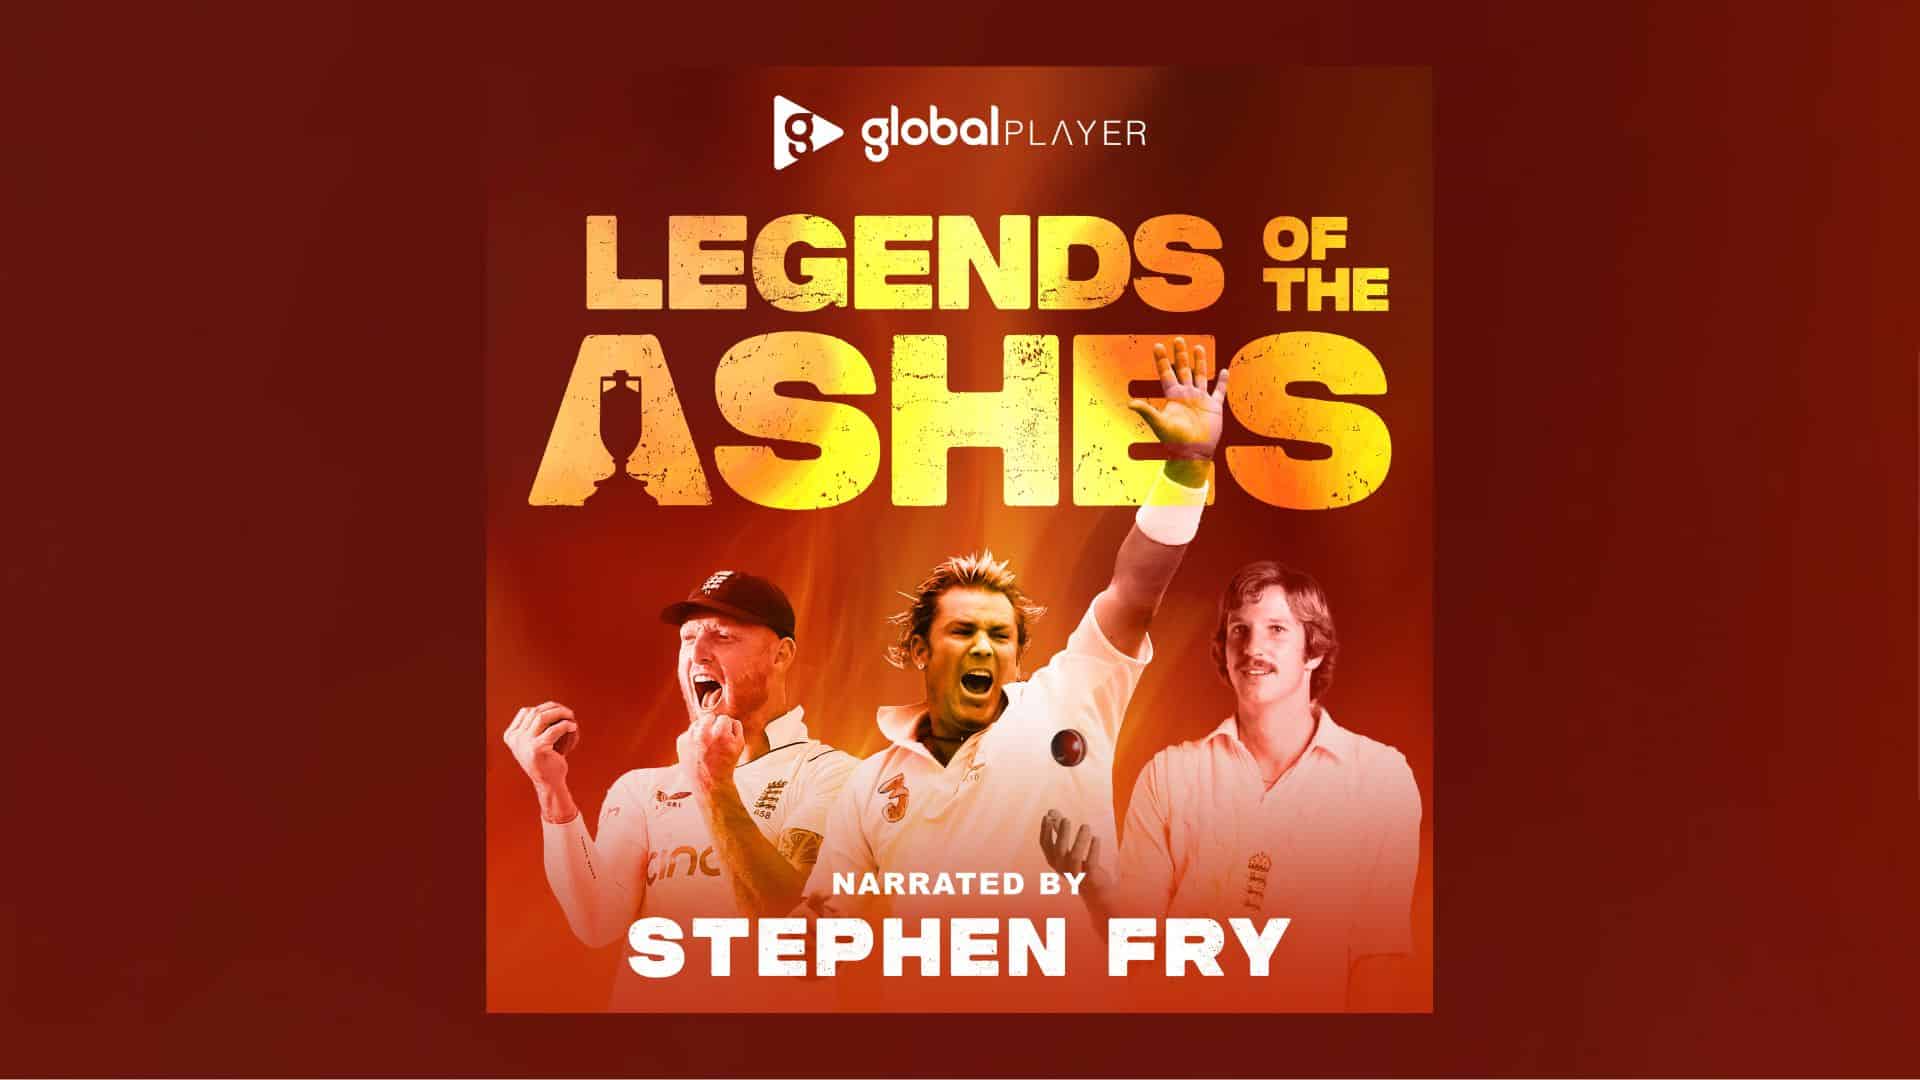 Global launches new Legends of the Ashes series on the iconic